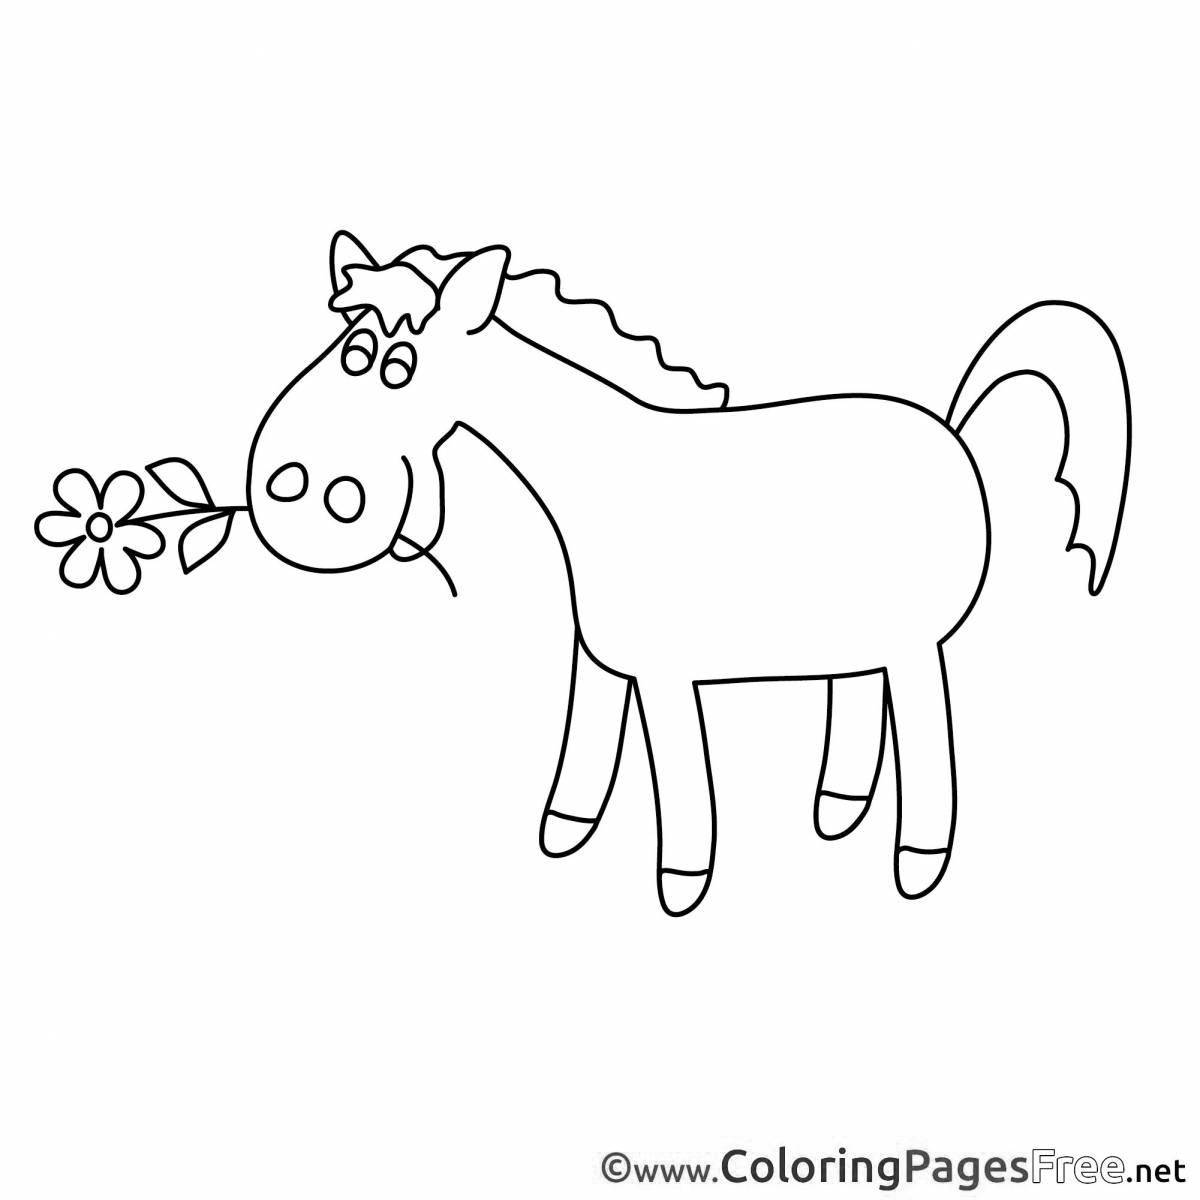 Playful blue tractor animals coloring book